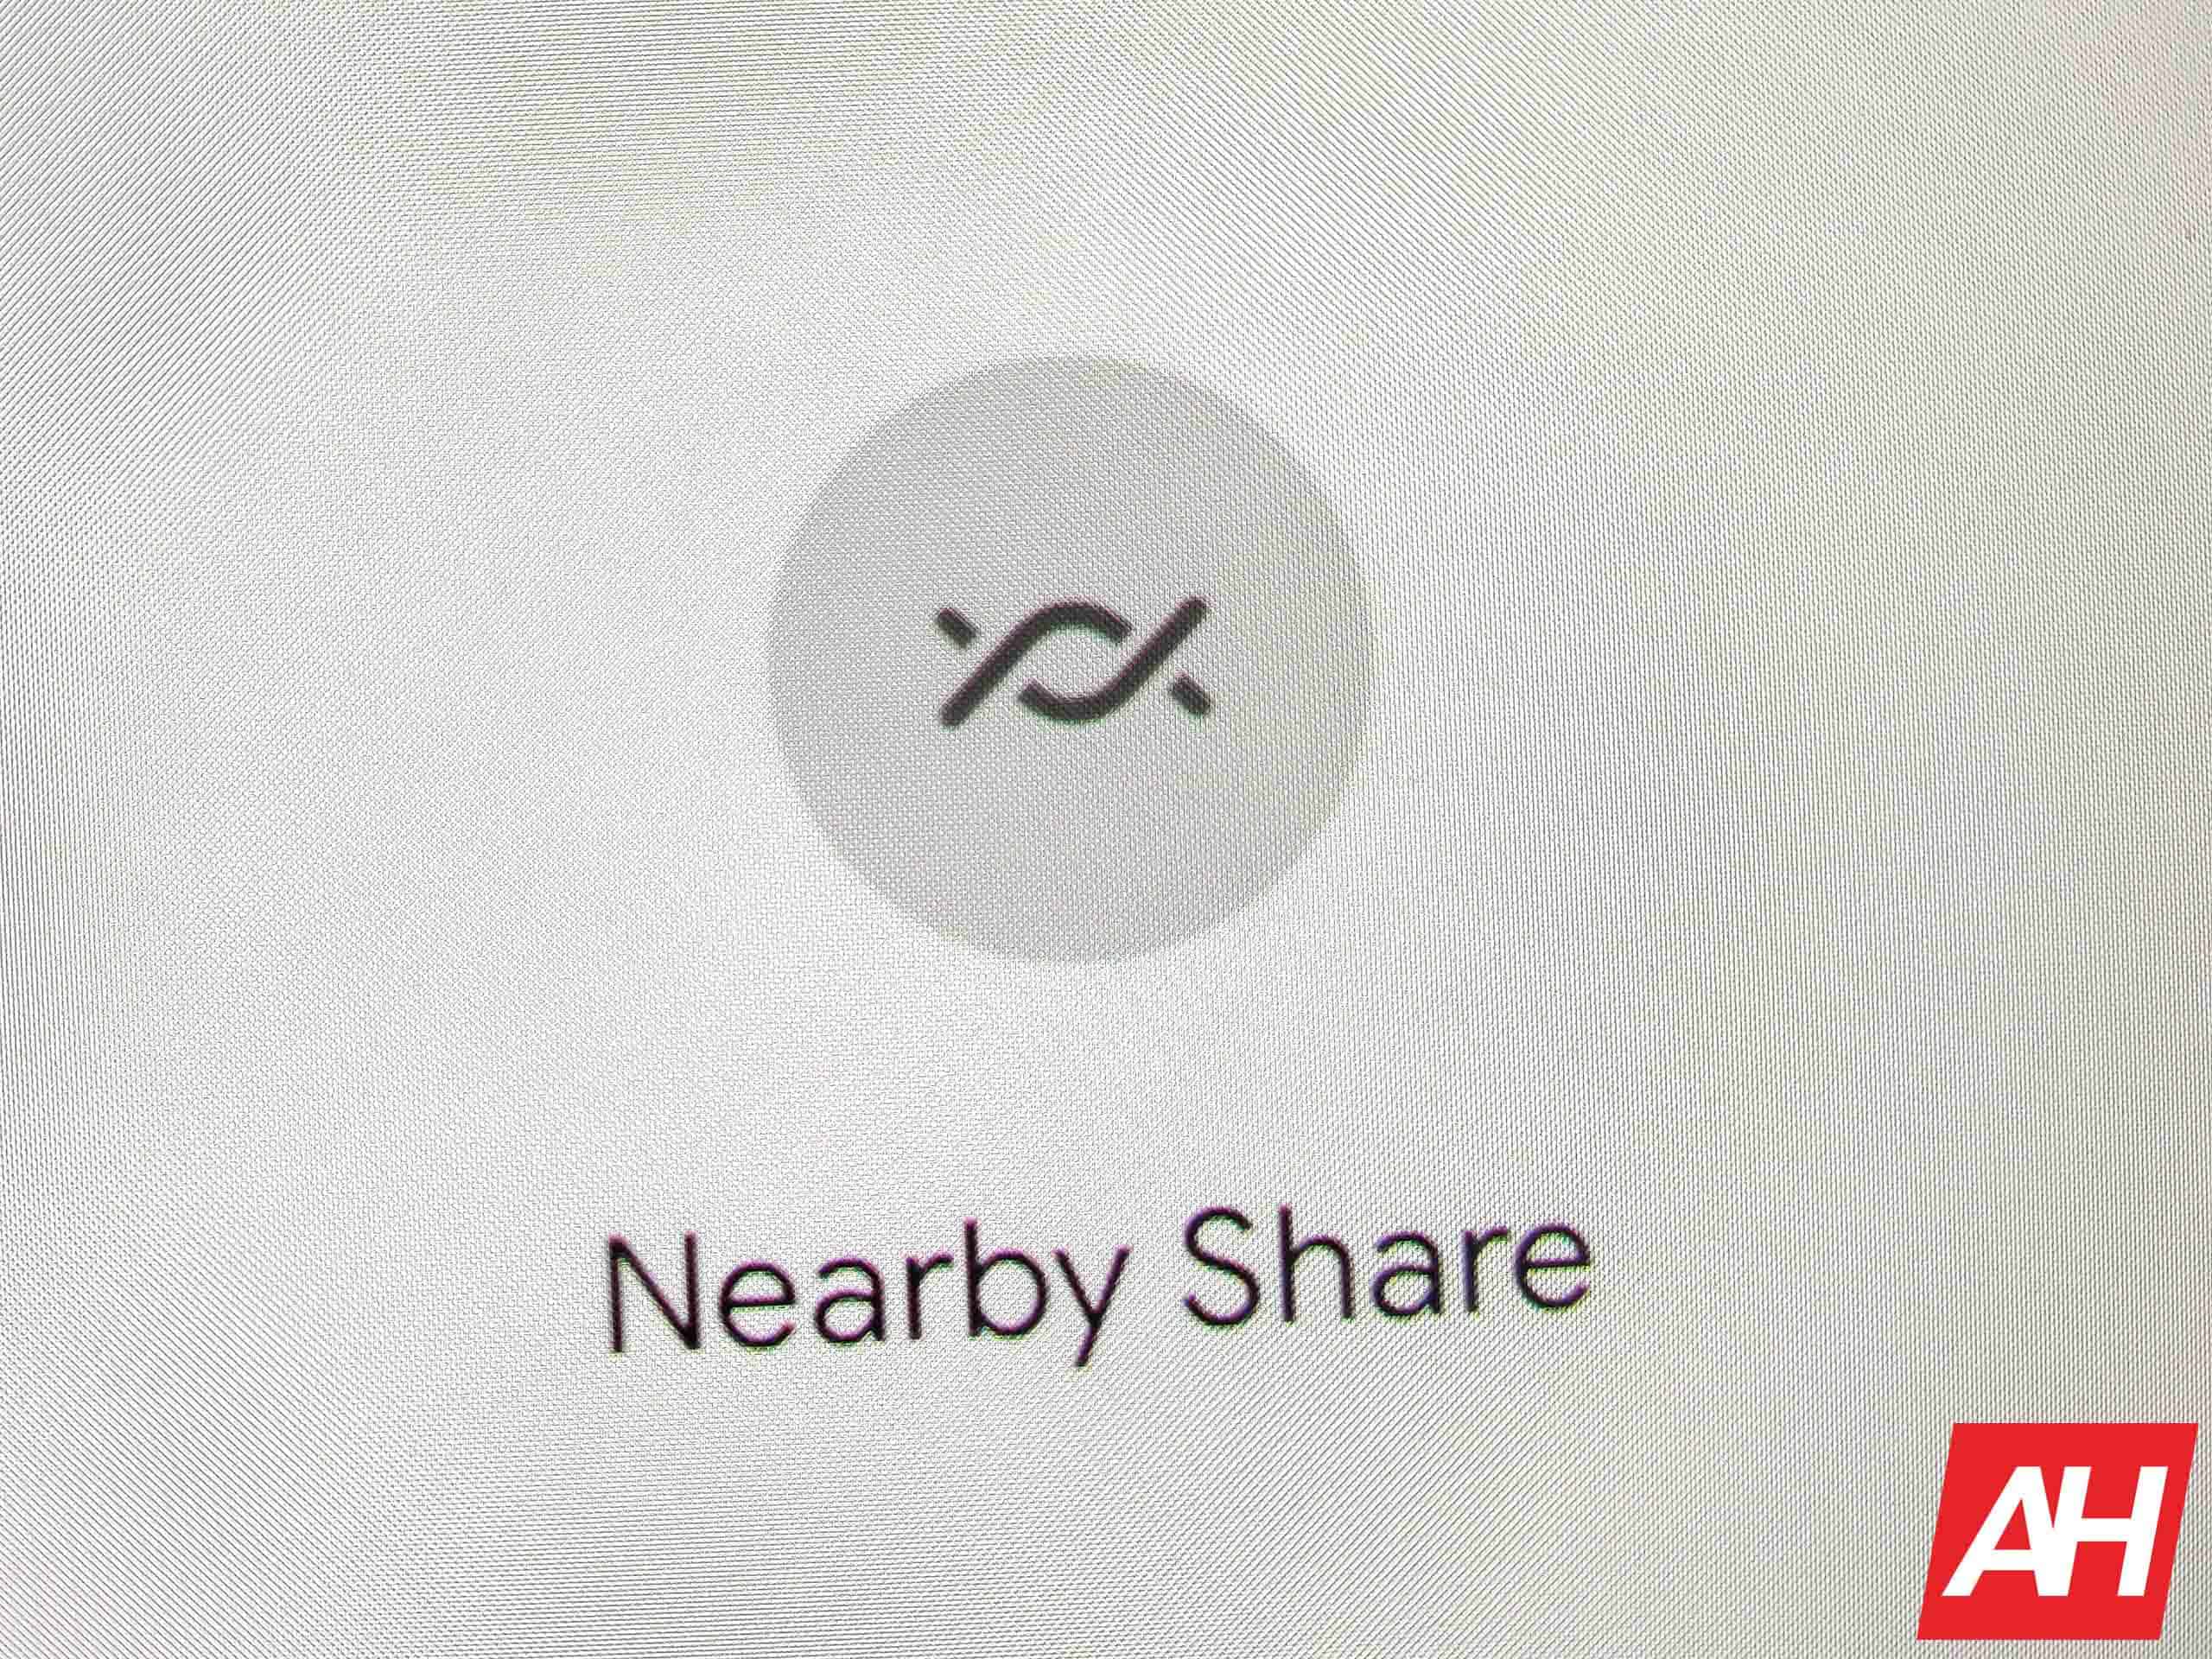 Nearby Share is getting a new name which raises an interesting question